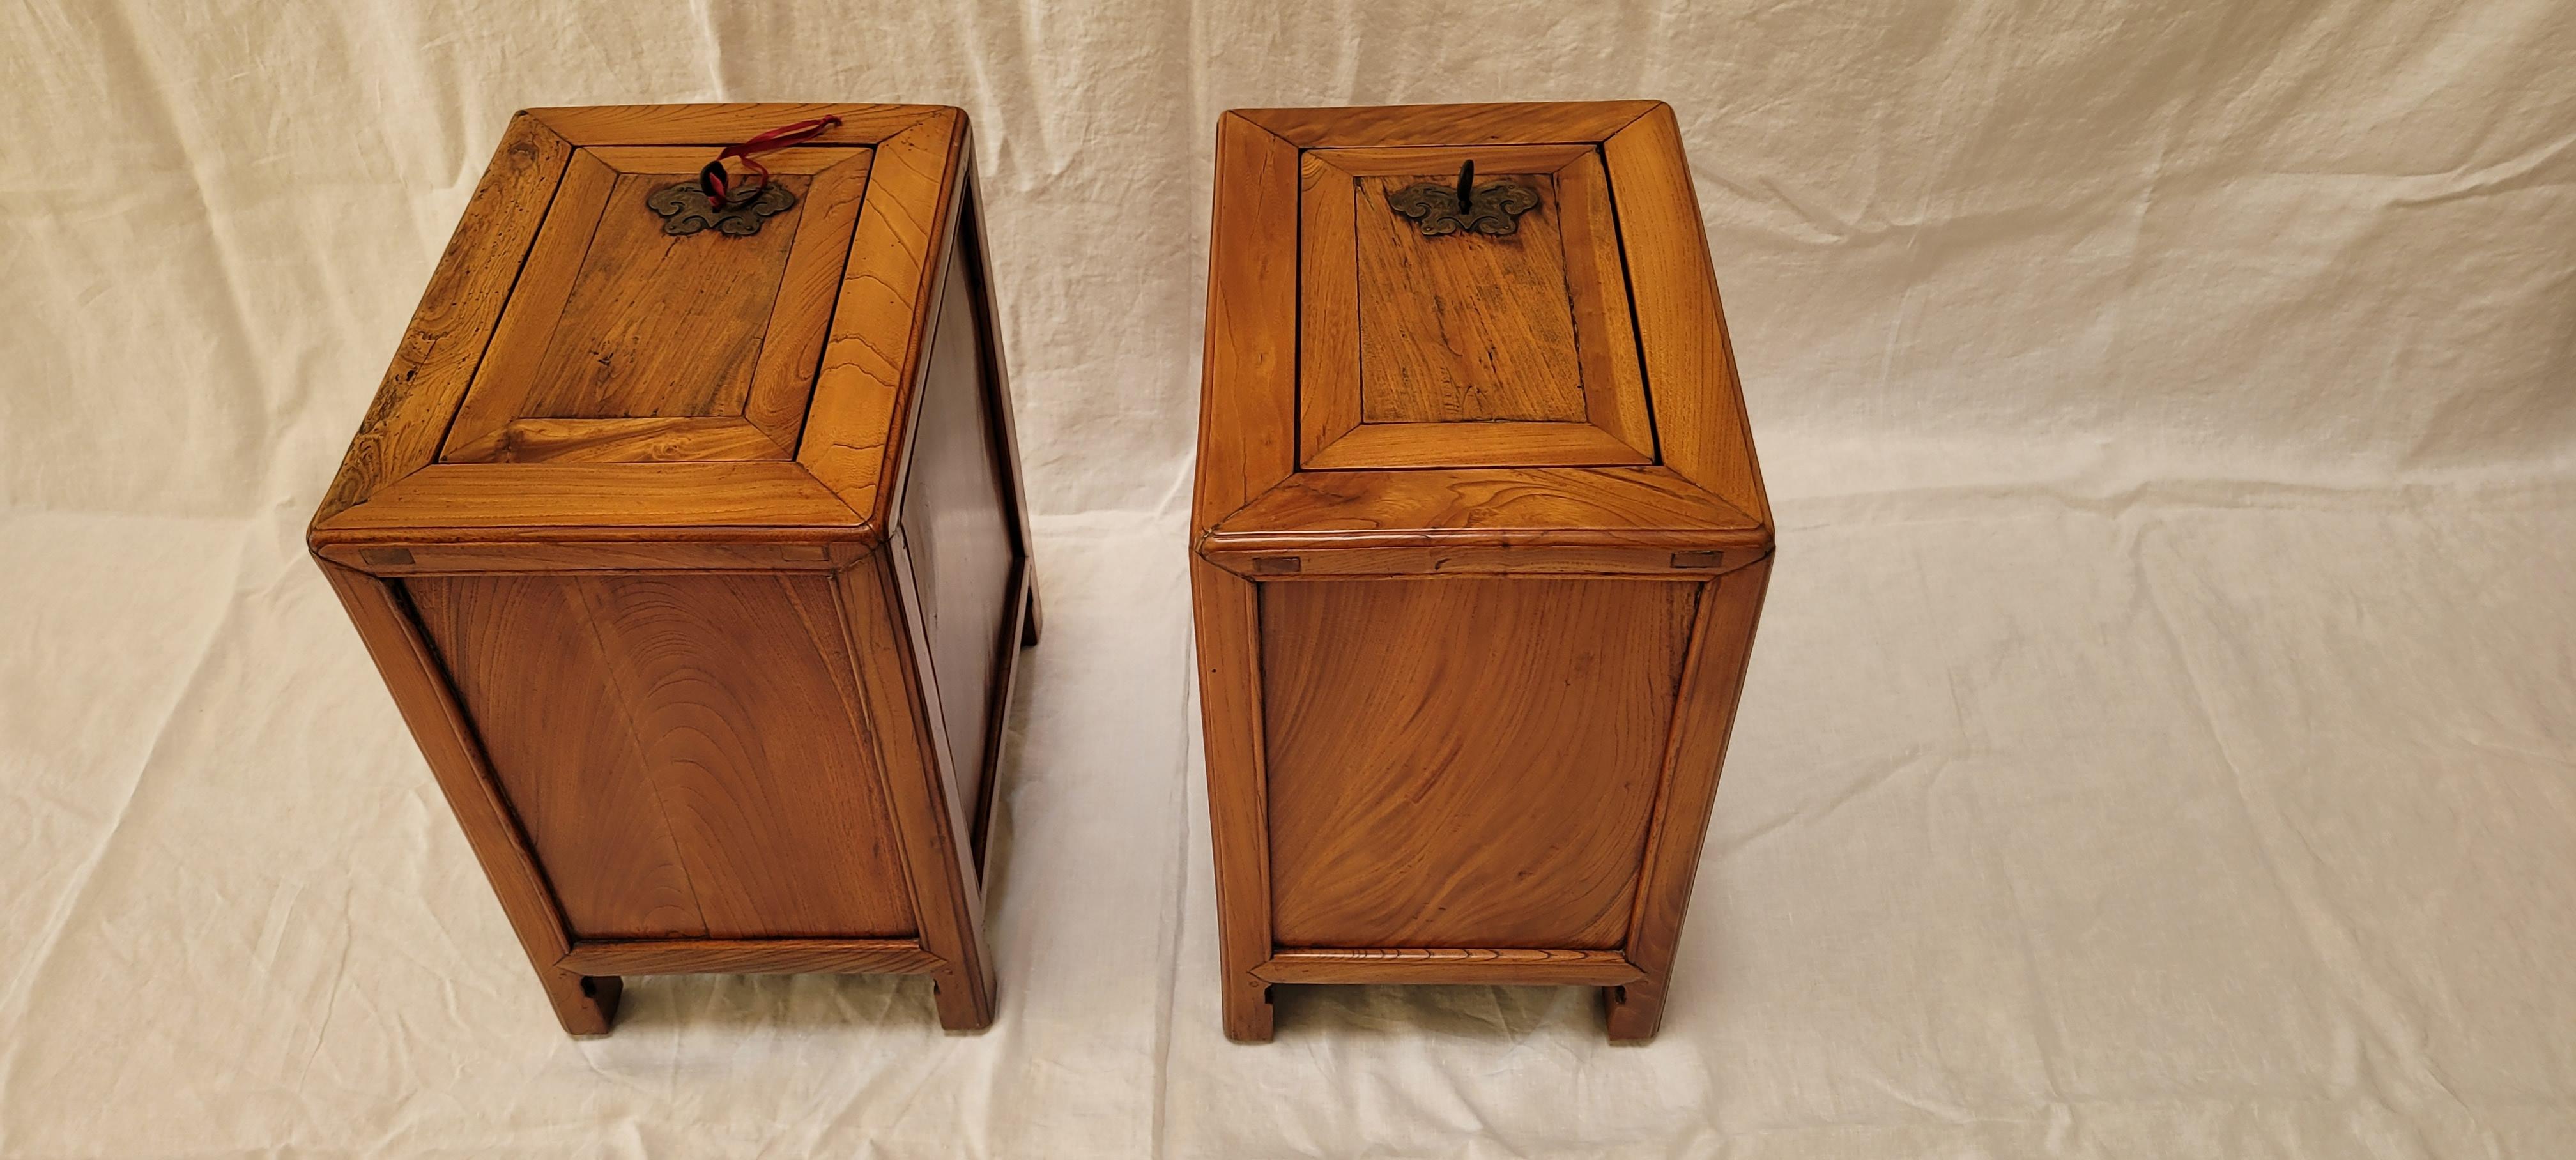 19th Century Pair of Money Chests For Sale 5